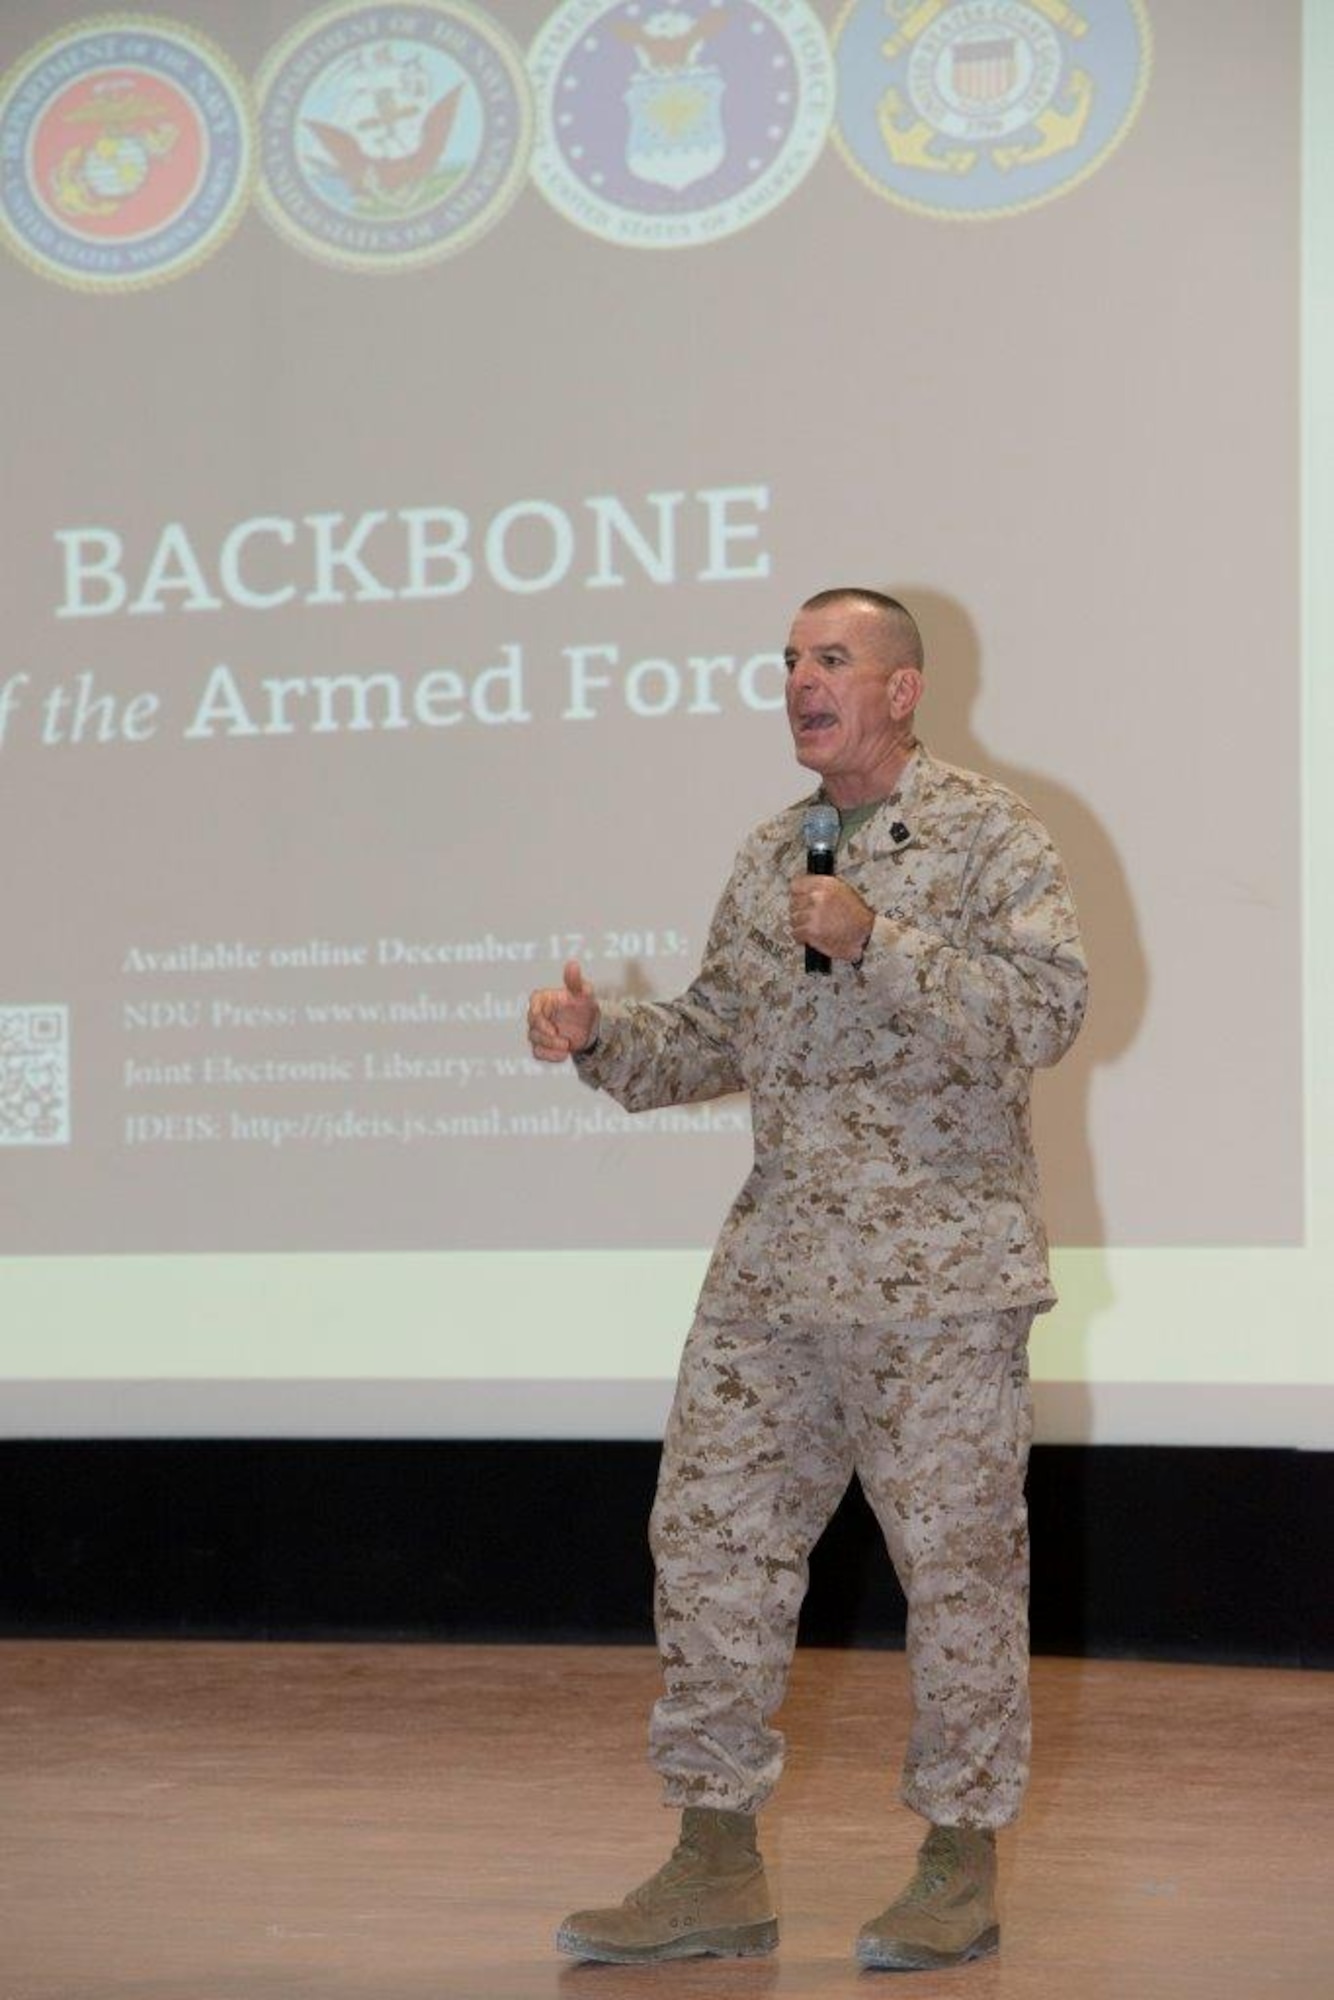 Sgt. Maj. Bryan Battaglia, Senior Enlisted Advisor to the Chairman of the Joint Chiefs of Staff, discusses the book “Noncommissioned Officer and Petty Officer: Backbone of the Armed Forces,” during an Enlisted All-Call with more than 400 members of Al Udeid Air Base, Qatar at the Coalition Compound Theater Oct. 8, 2015. The book, Battaglia said, is one-of-a-kind and provides a comprehensive explanation of what’s expected of enlisted leaders across America’s armed services. During the All-Call, Battaglia also discussed professional development, joint missions and the Department of Defense’s bi-annual award review. He also recognized 10 service members for excellent performance. (U.S. Air Force Photo/Tech. Sgt. James Hodgman) 